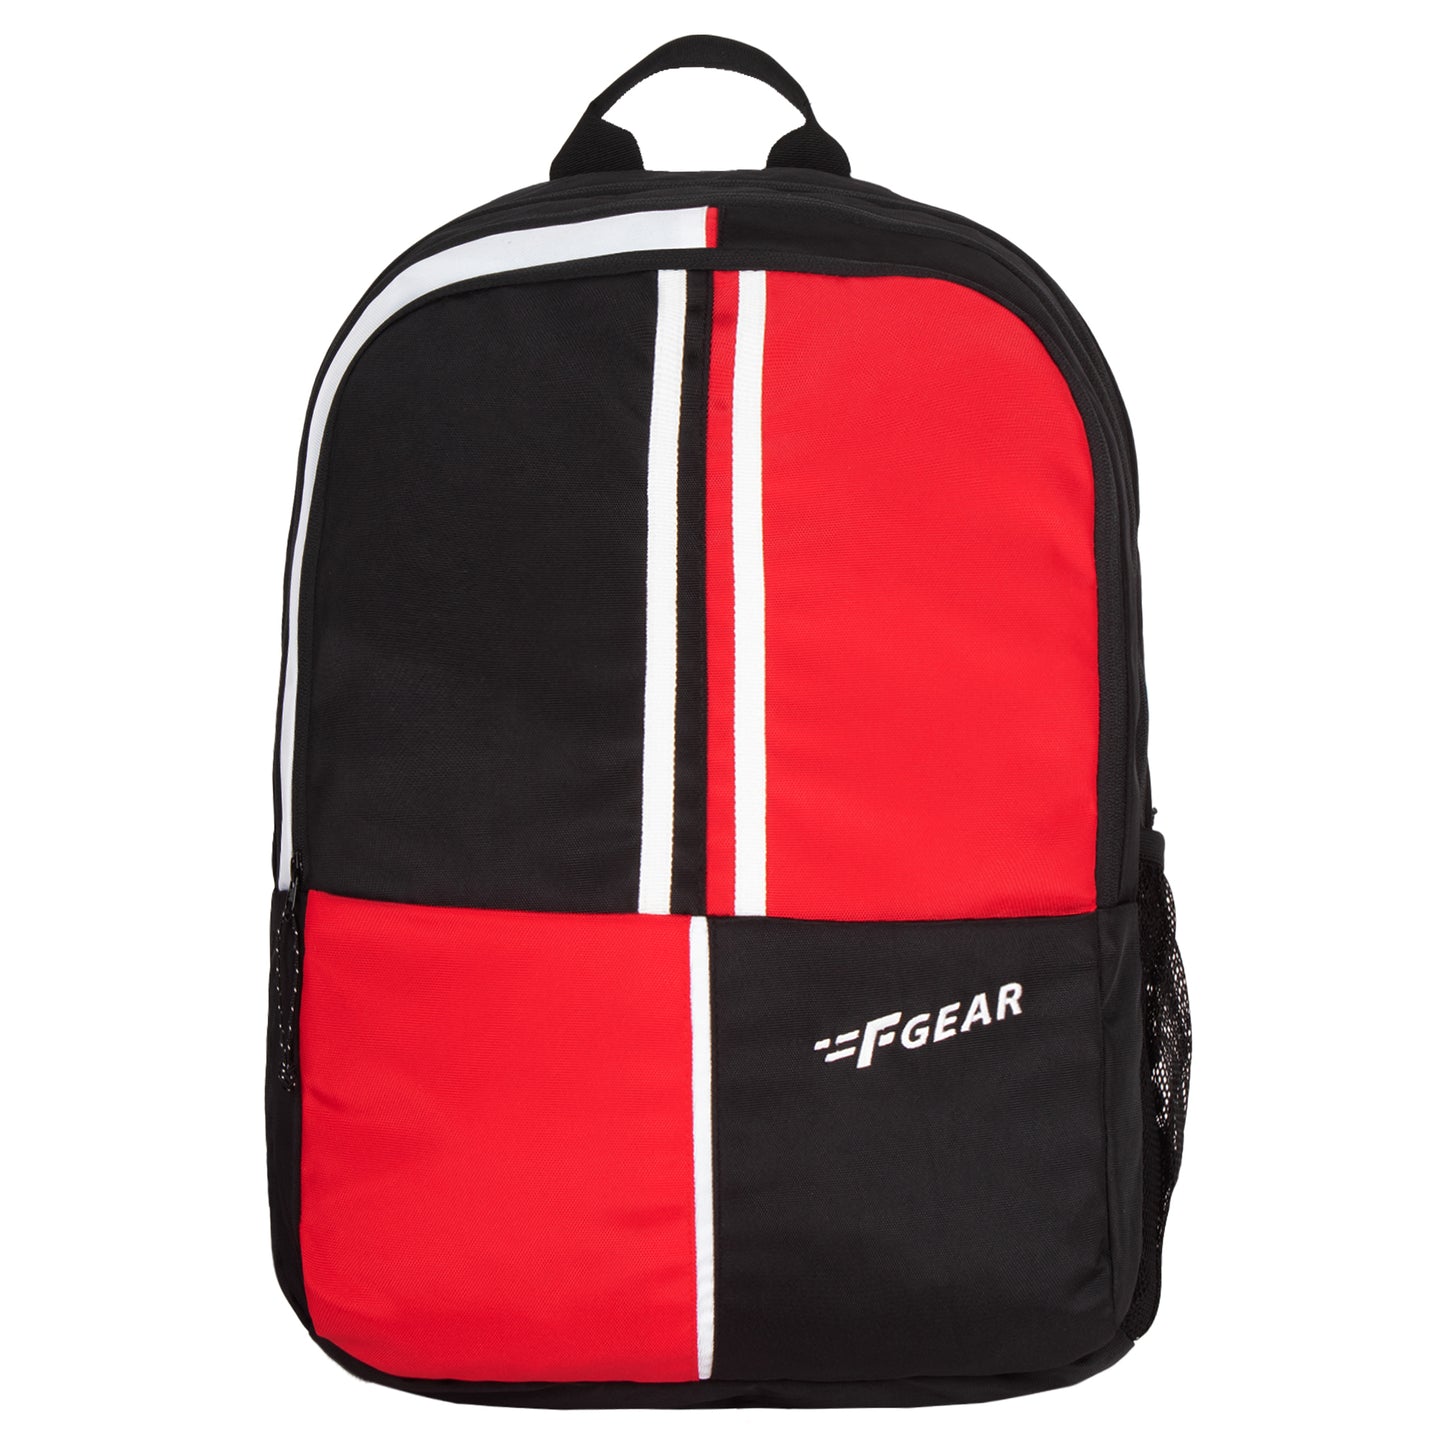 Medusa 28L Black Red Backpack with Raincover